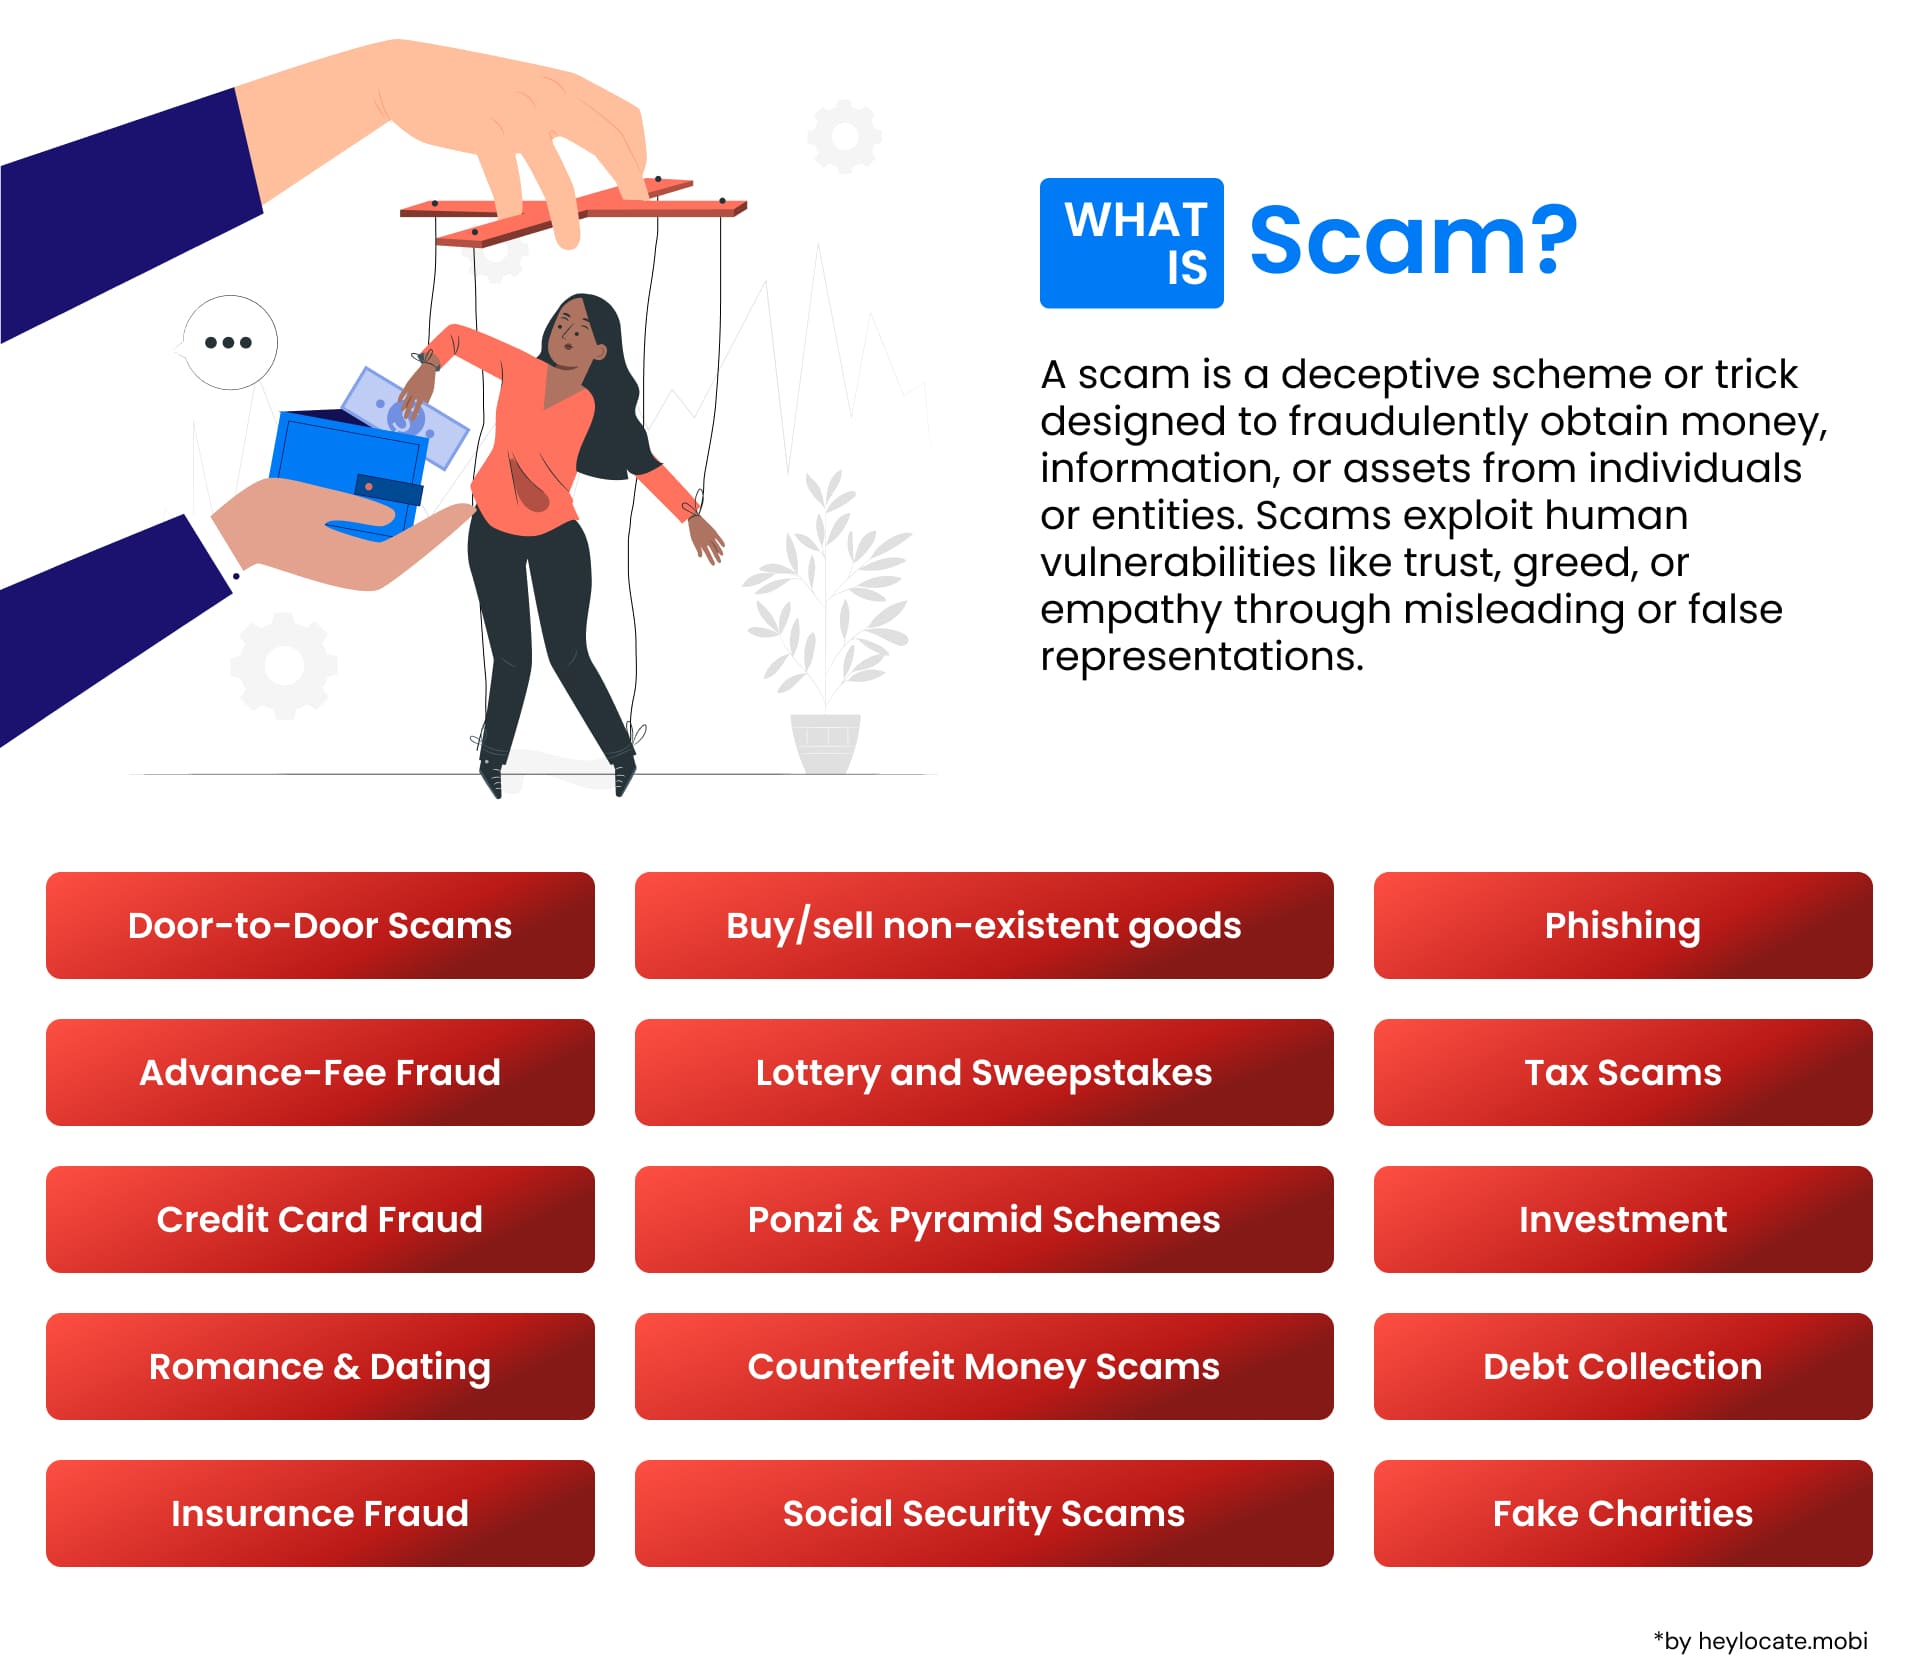 Illustrative infographic on what scam is, with various types listed and a central figure manipulated by strings